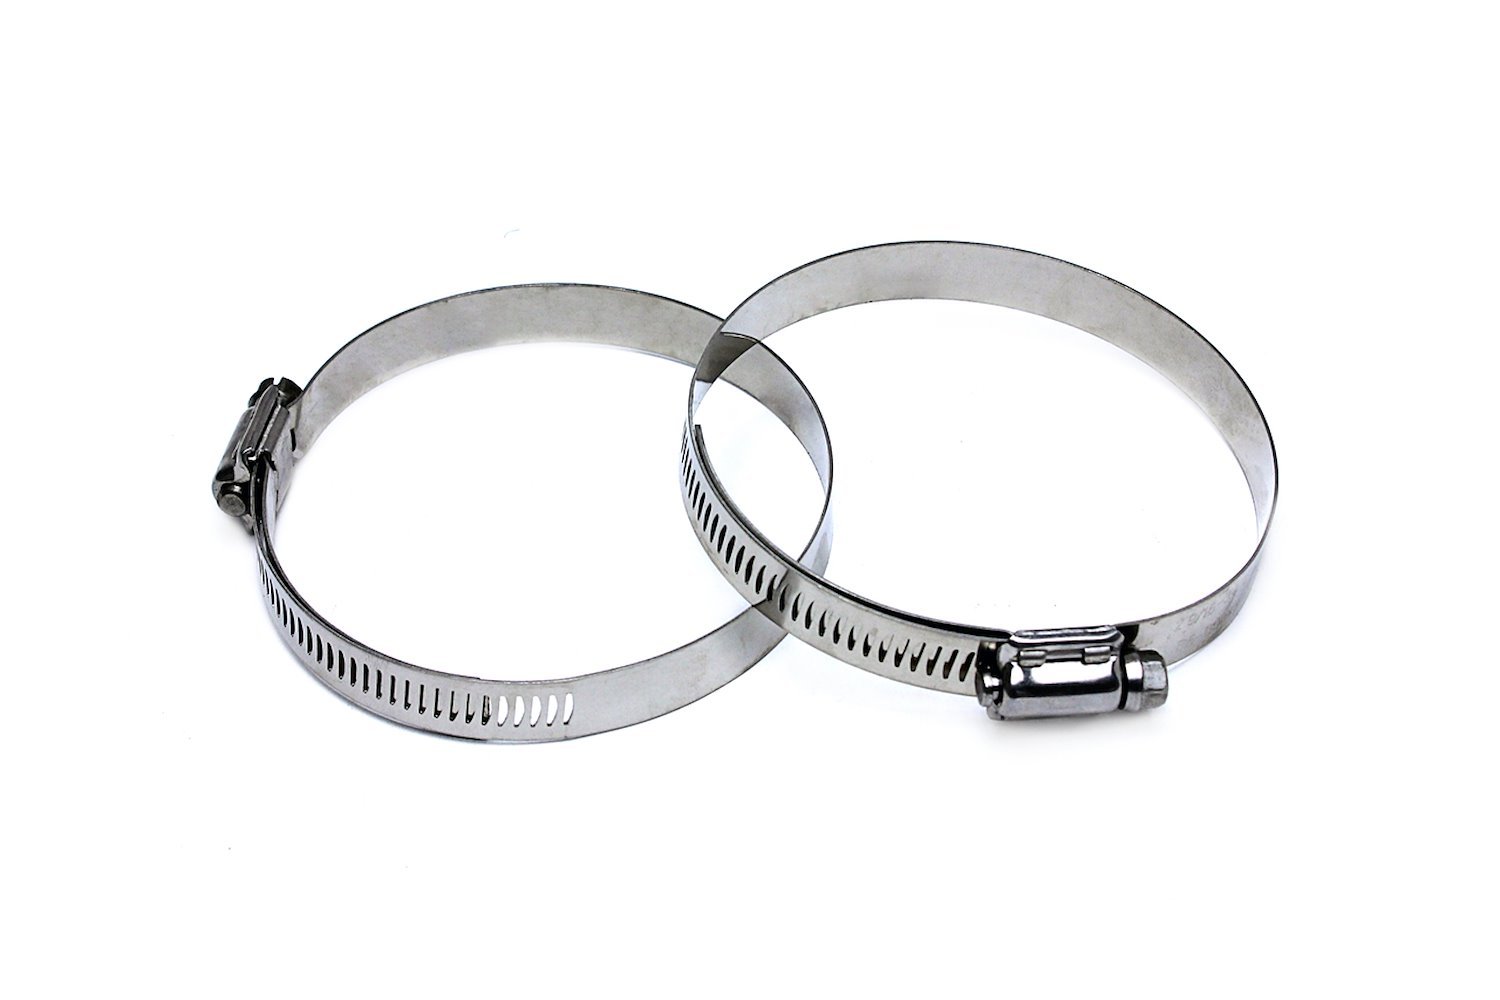 SSWC-130-152x2 Stainless Steel Worm Gear Hose Clamp, Effective Range: 5-5/8 in.- 6-1/2 in., 2Pc